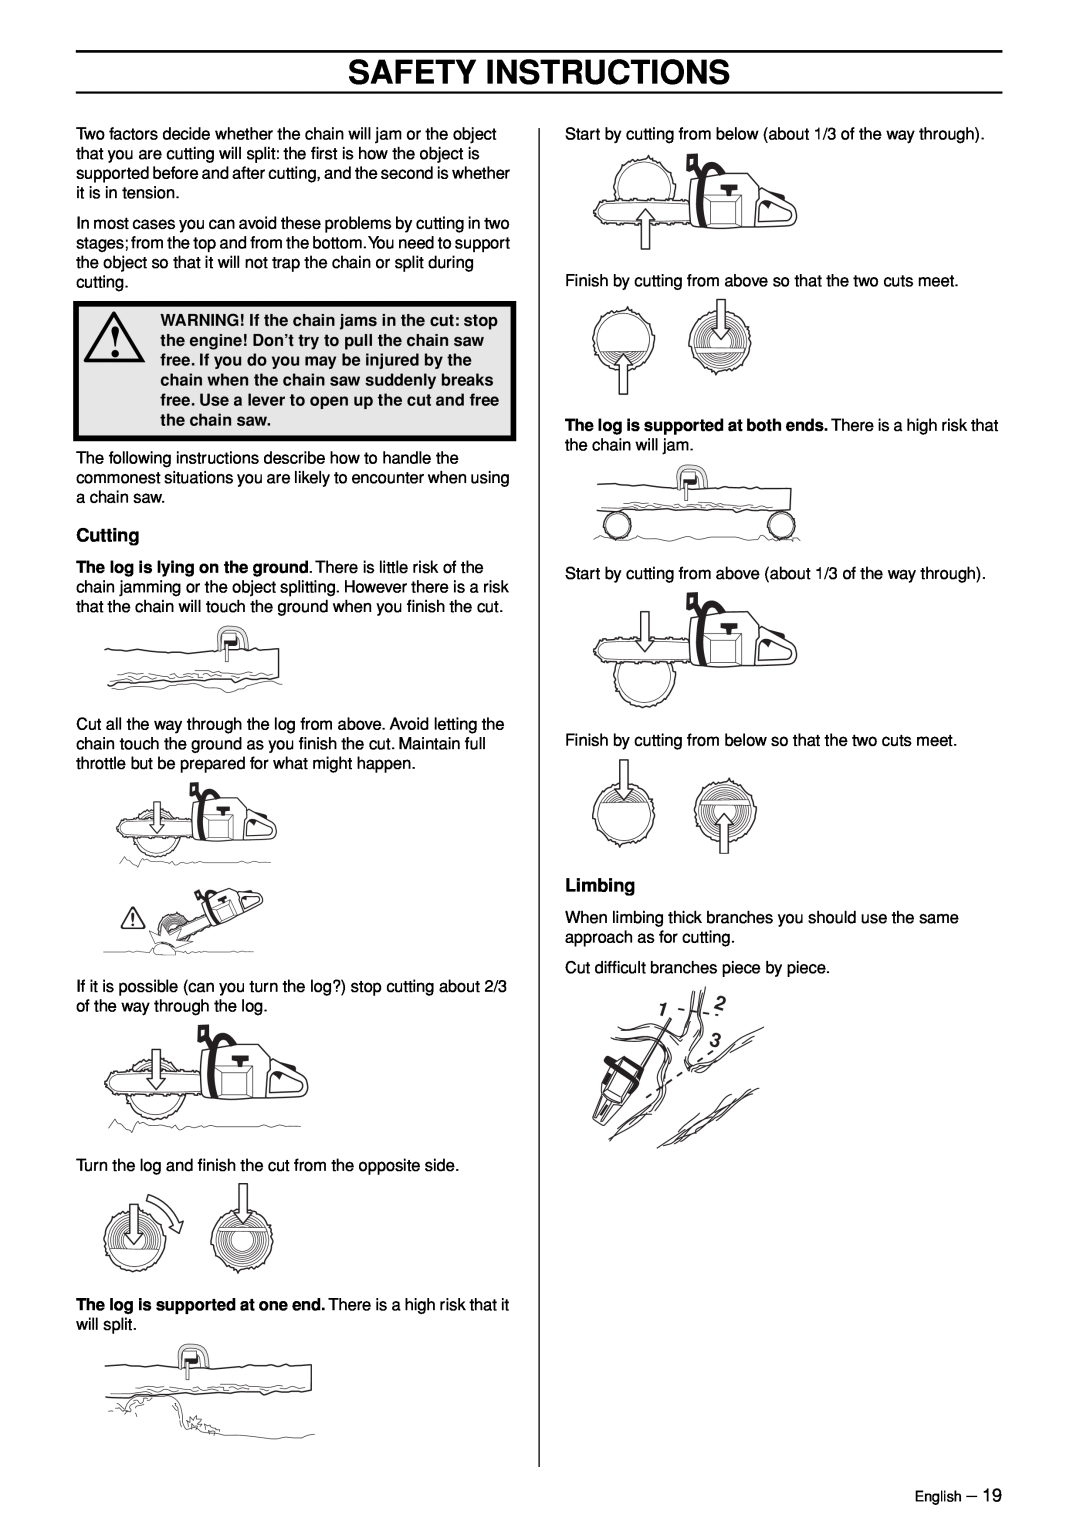 Jonsered CS 2171WH manual Cutting, Limbing, WARNING! If the chain jams in the cut stop, Safety Instructions 